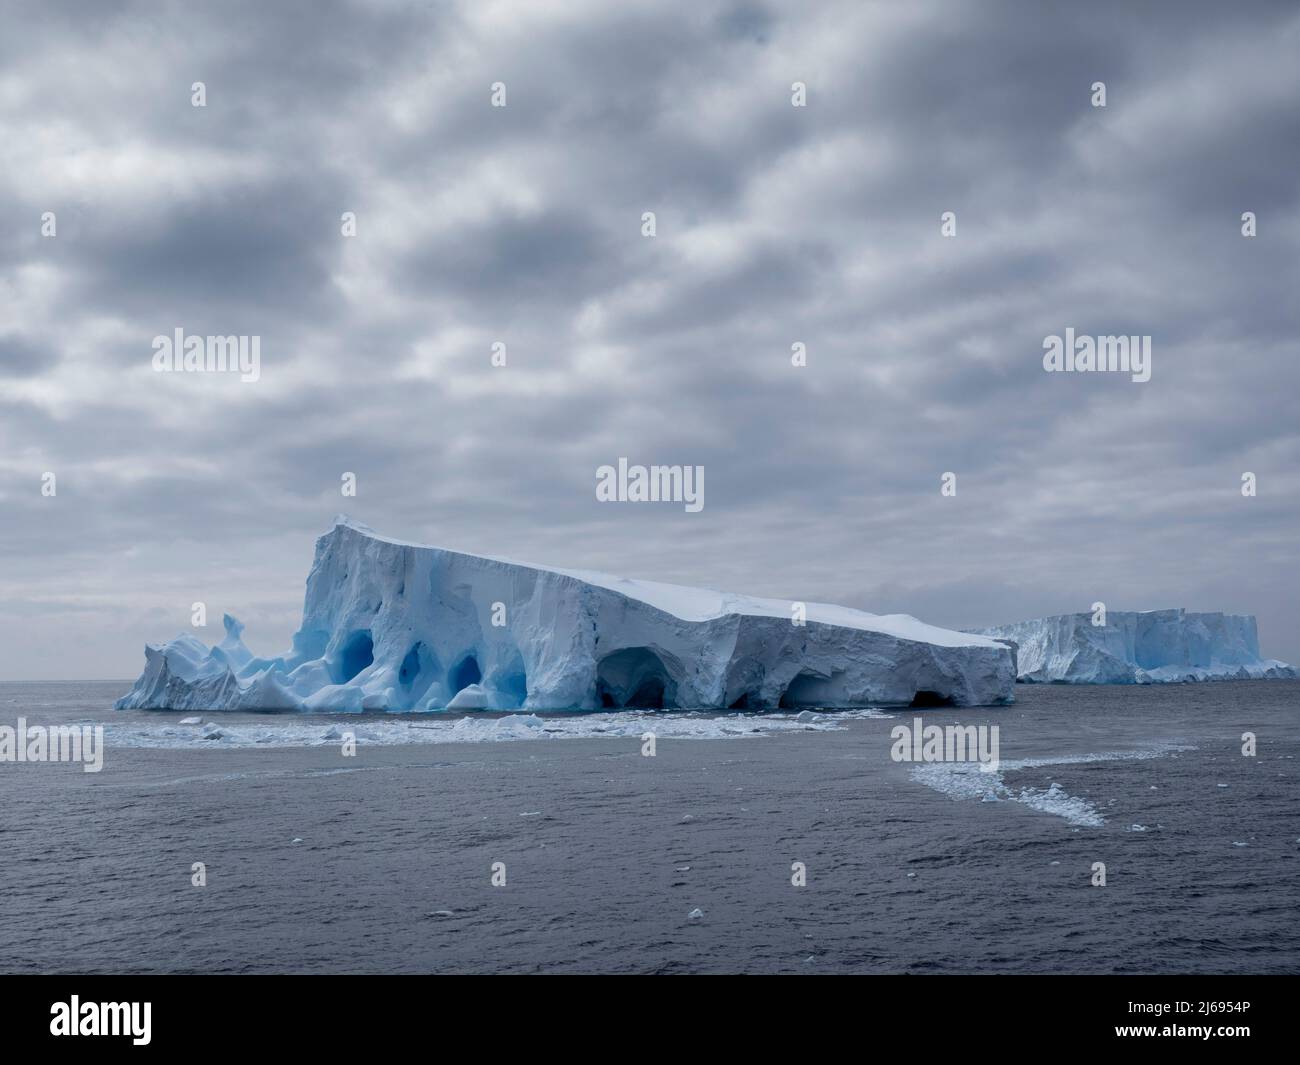 A large iceberg with holes and arches formed in it near Coronation Island, South Orkneys, Antarctica, Polar Regions Stock Photo